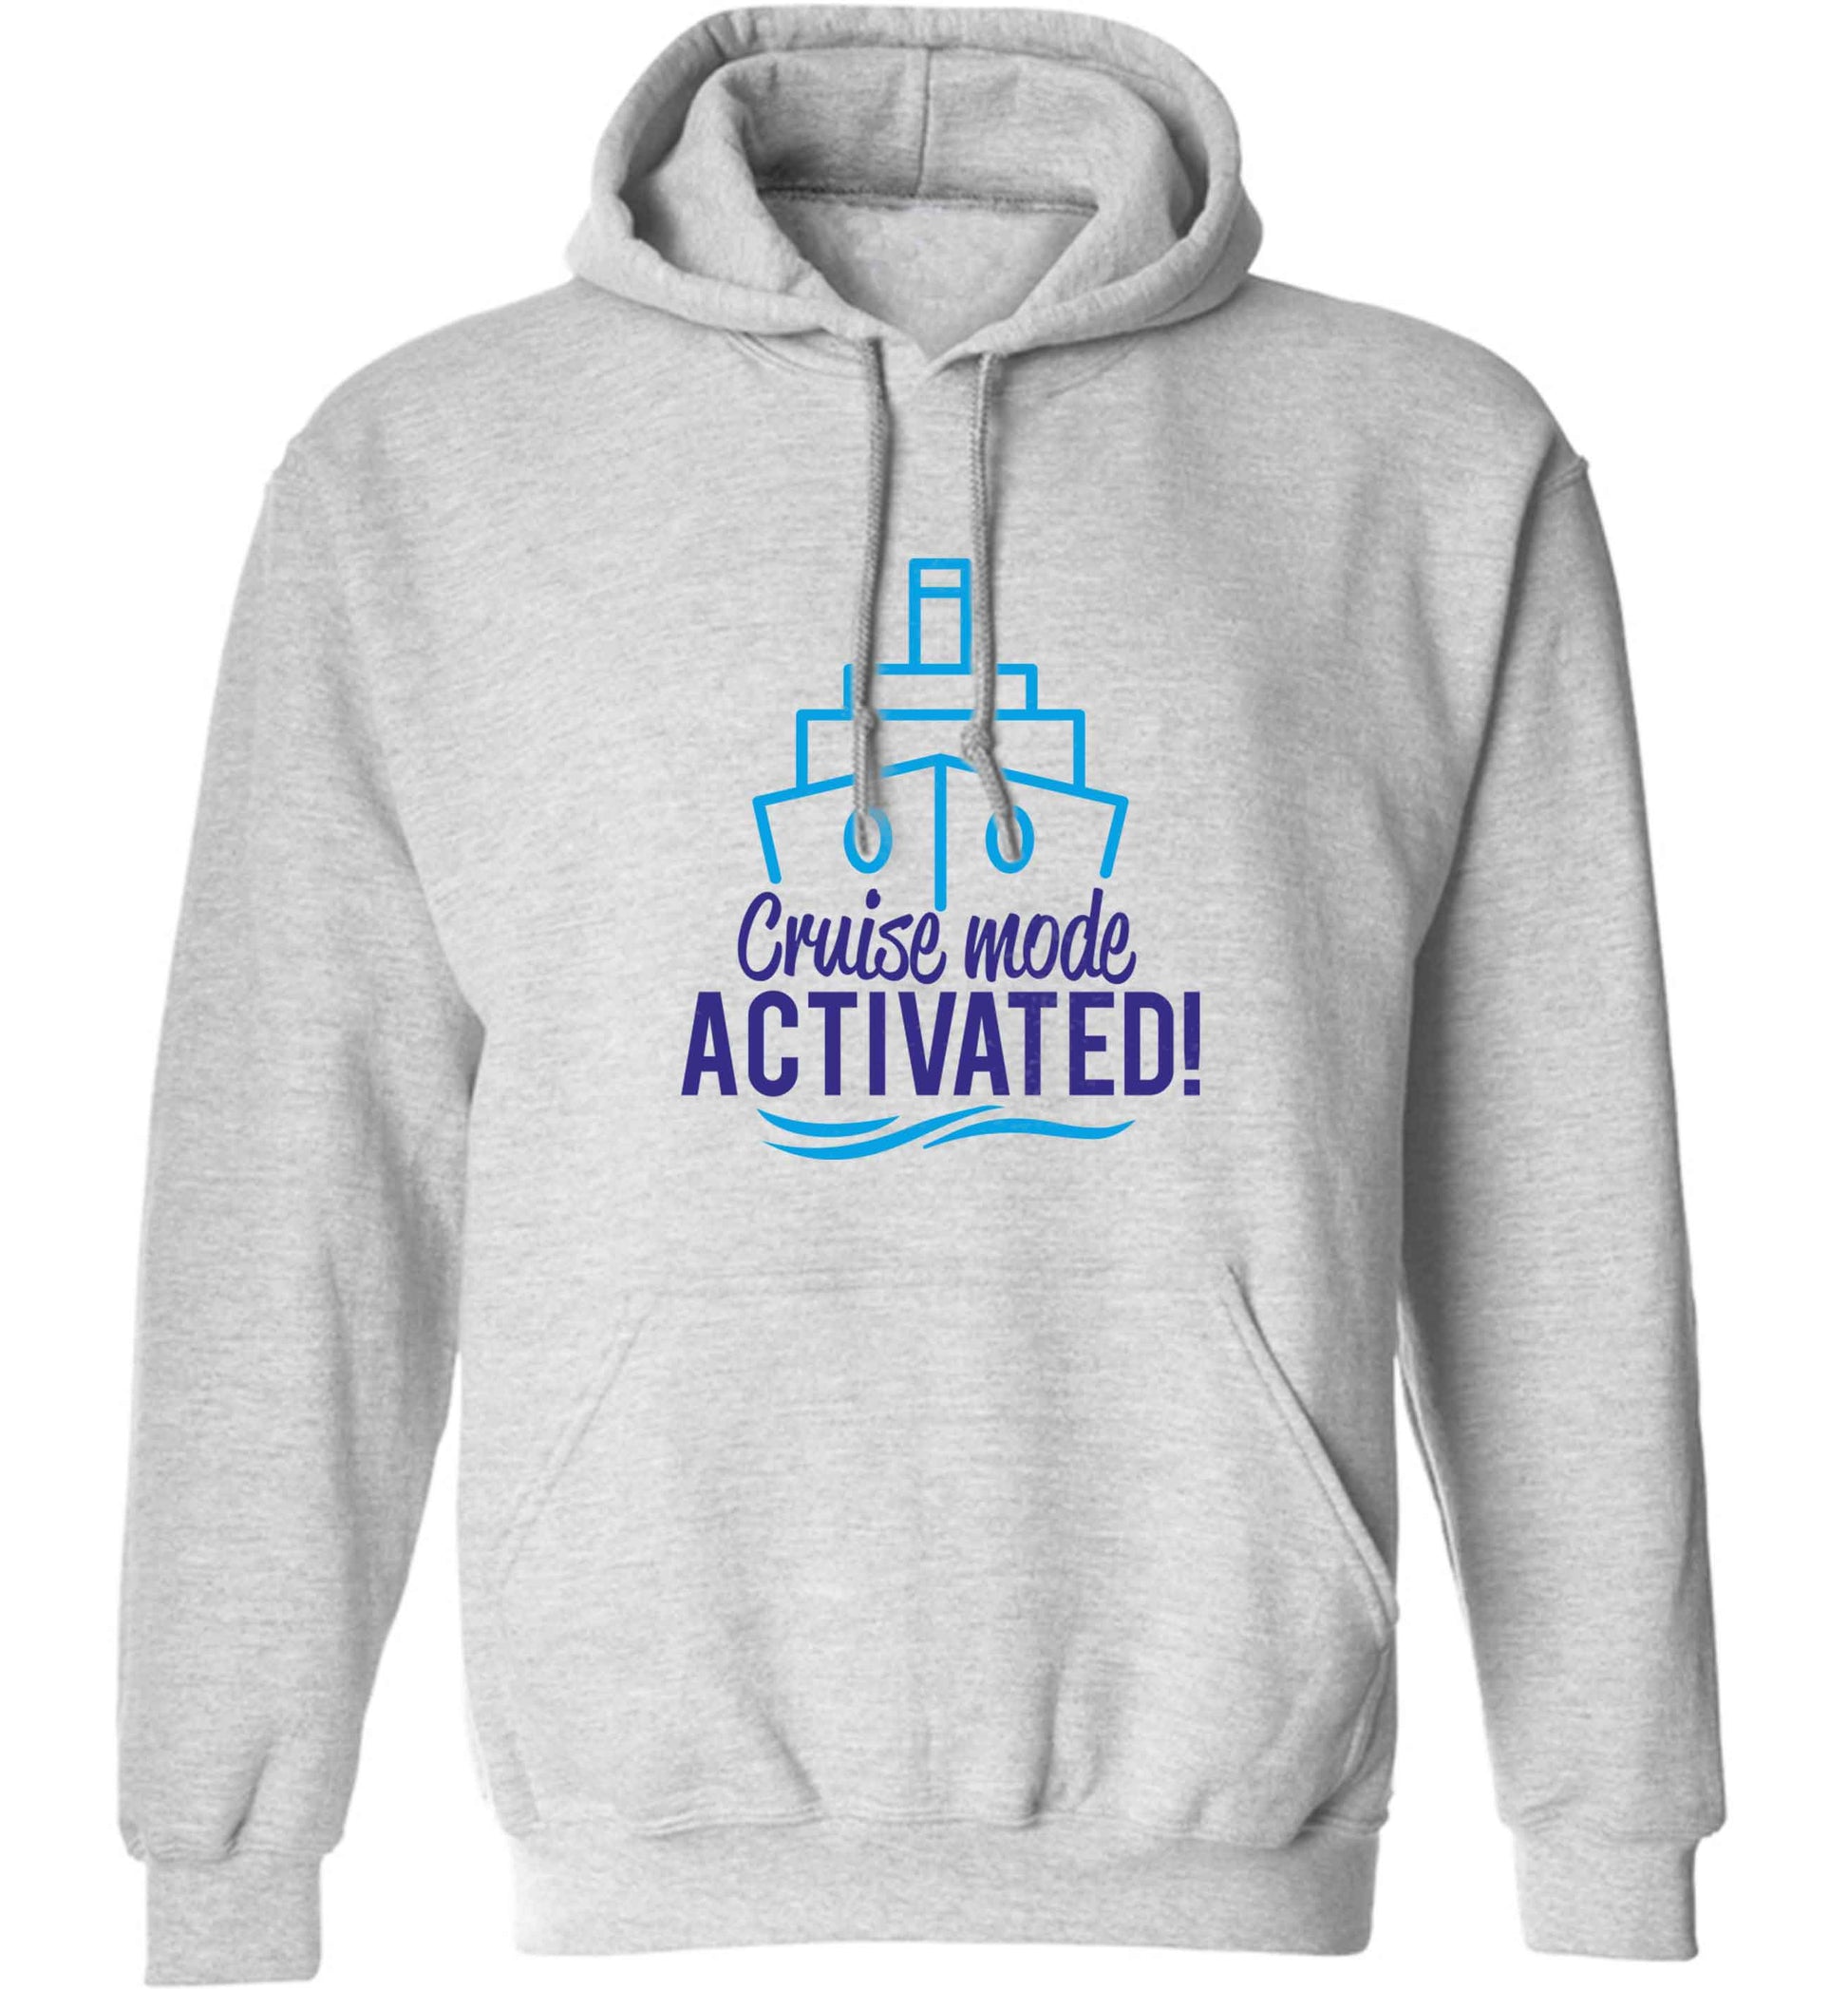 Cruise mode activated adults unisex grey hoodie 2XL